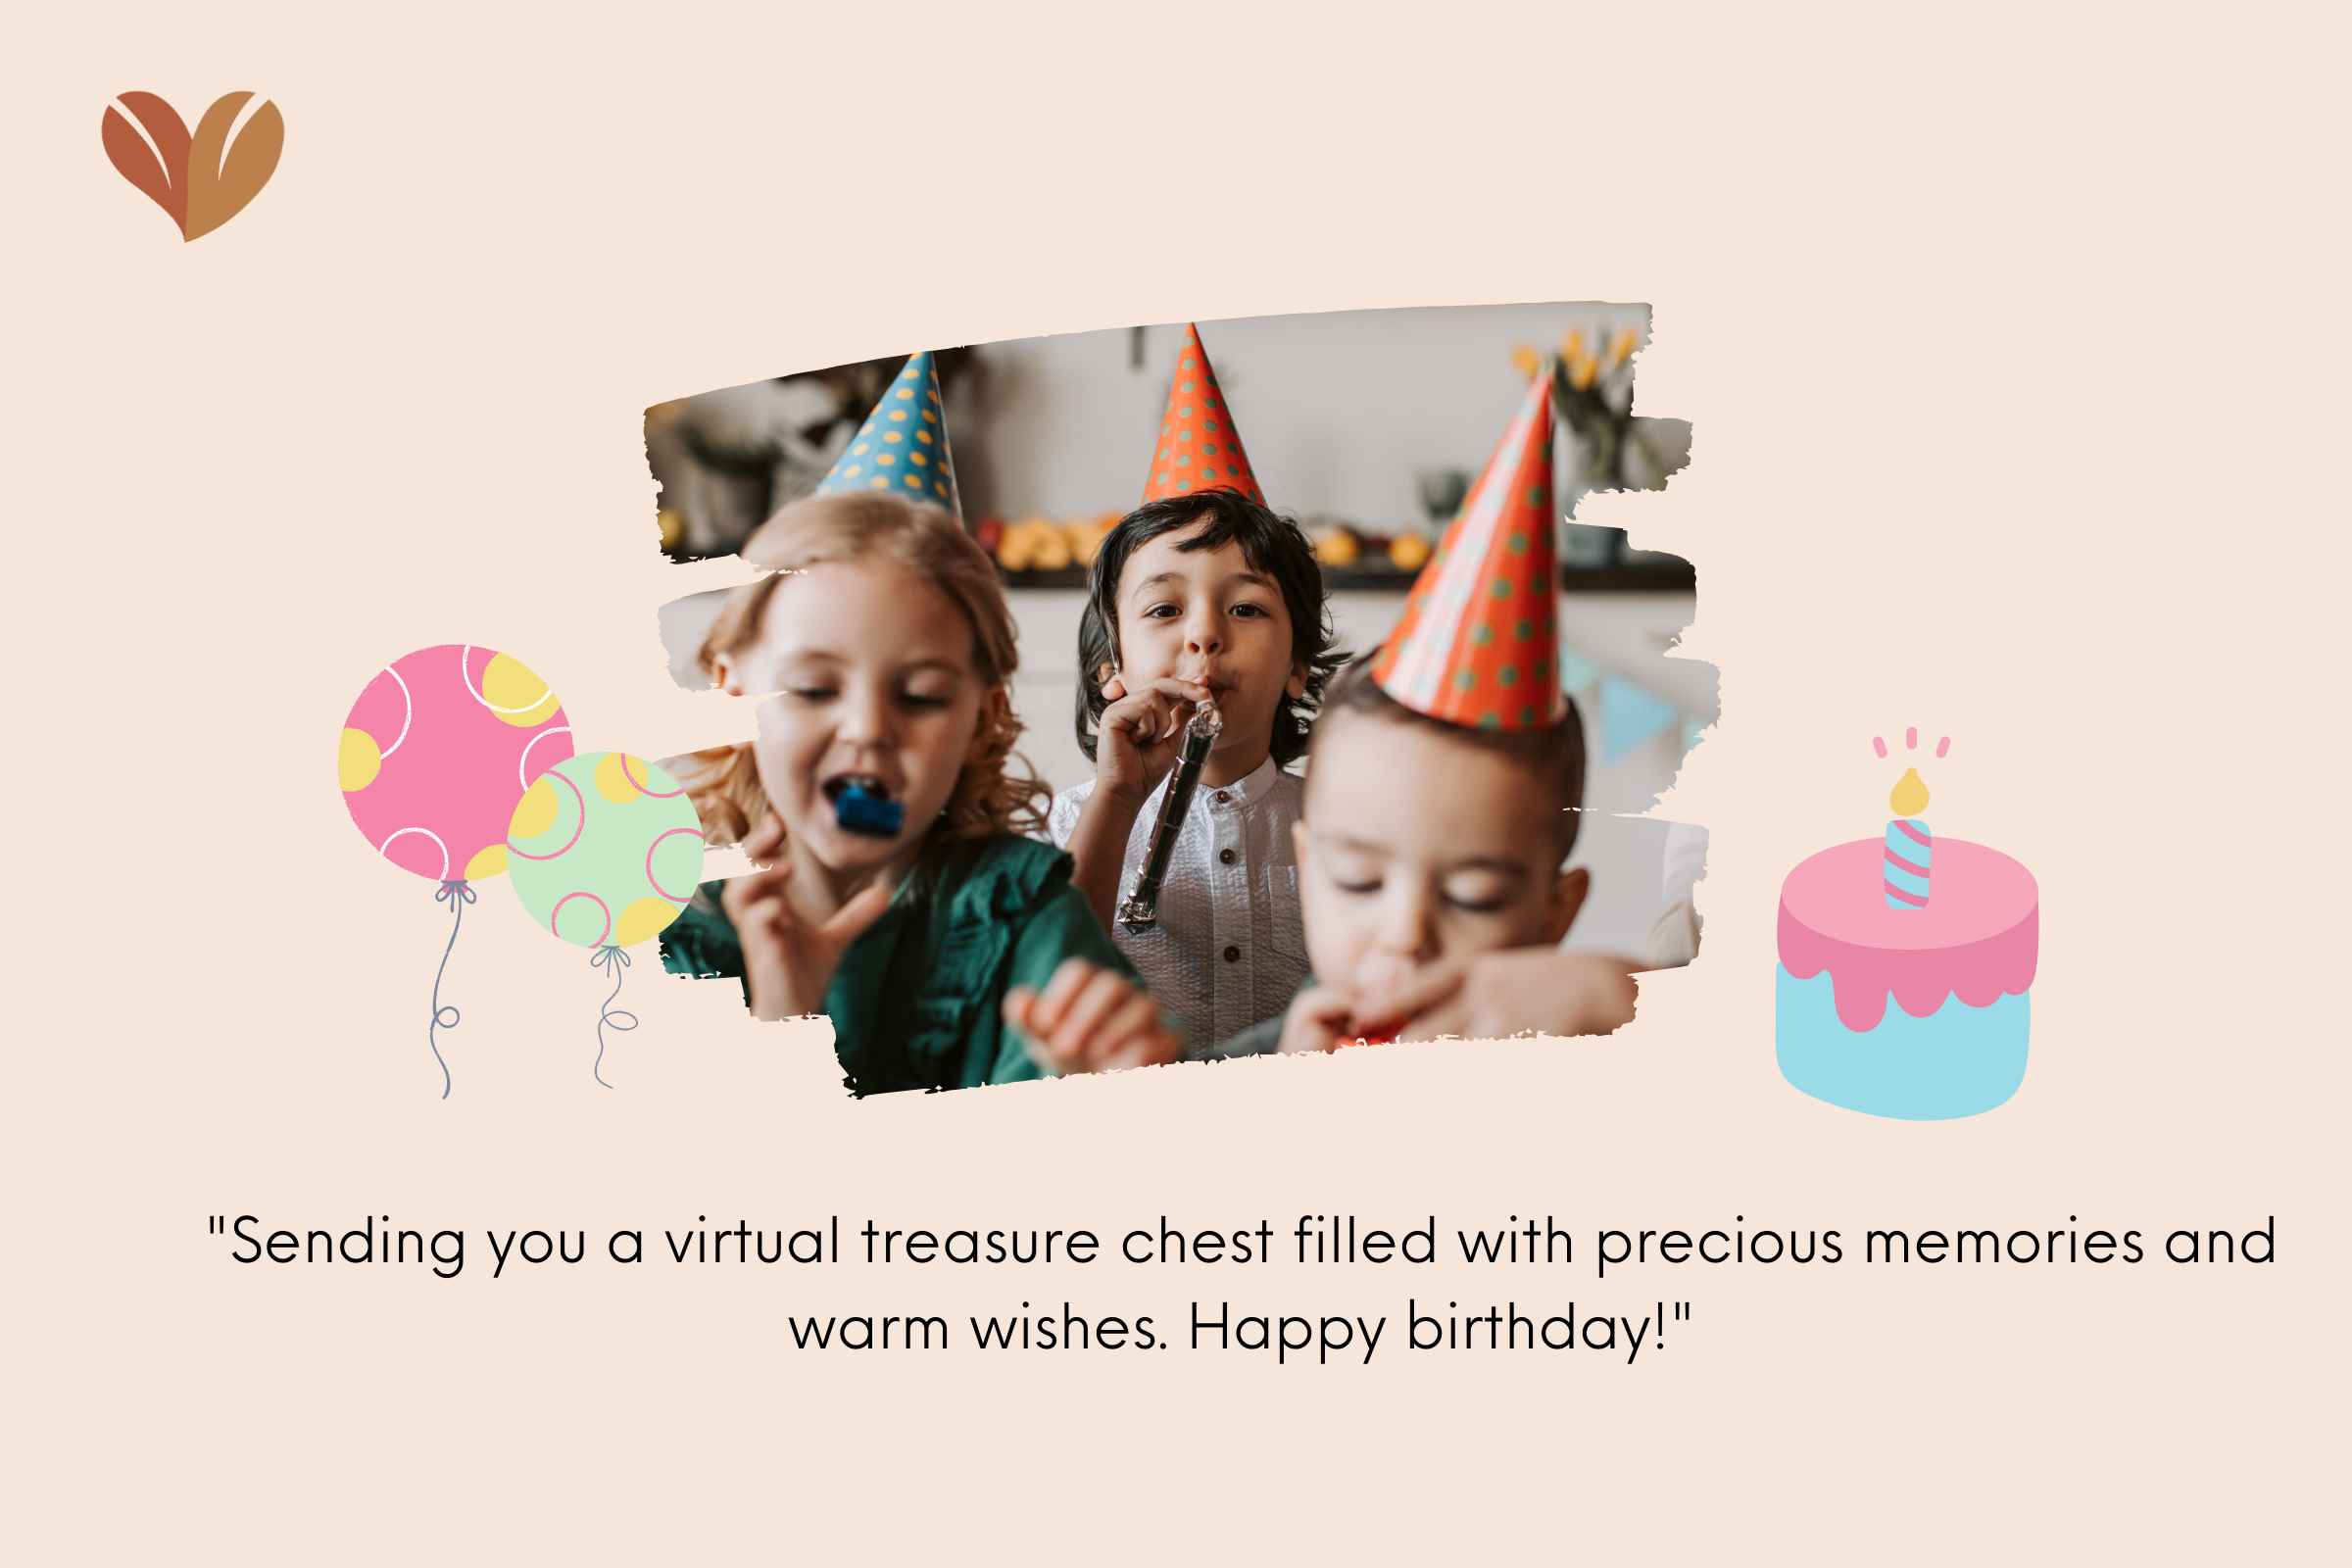 Warming Birthday wishes for your long-distance best friend